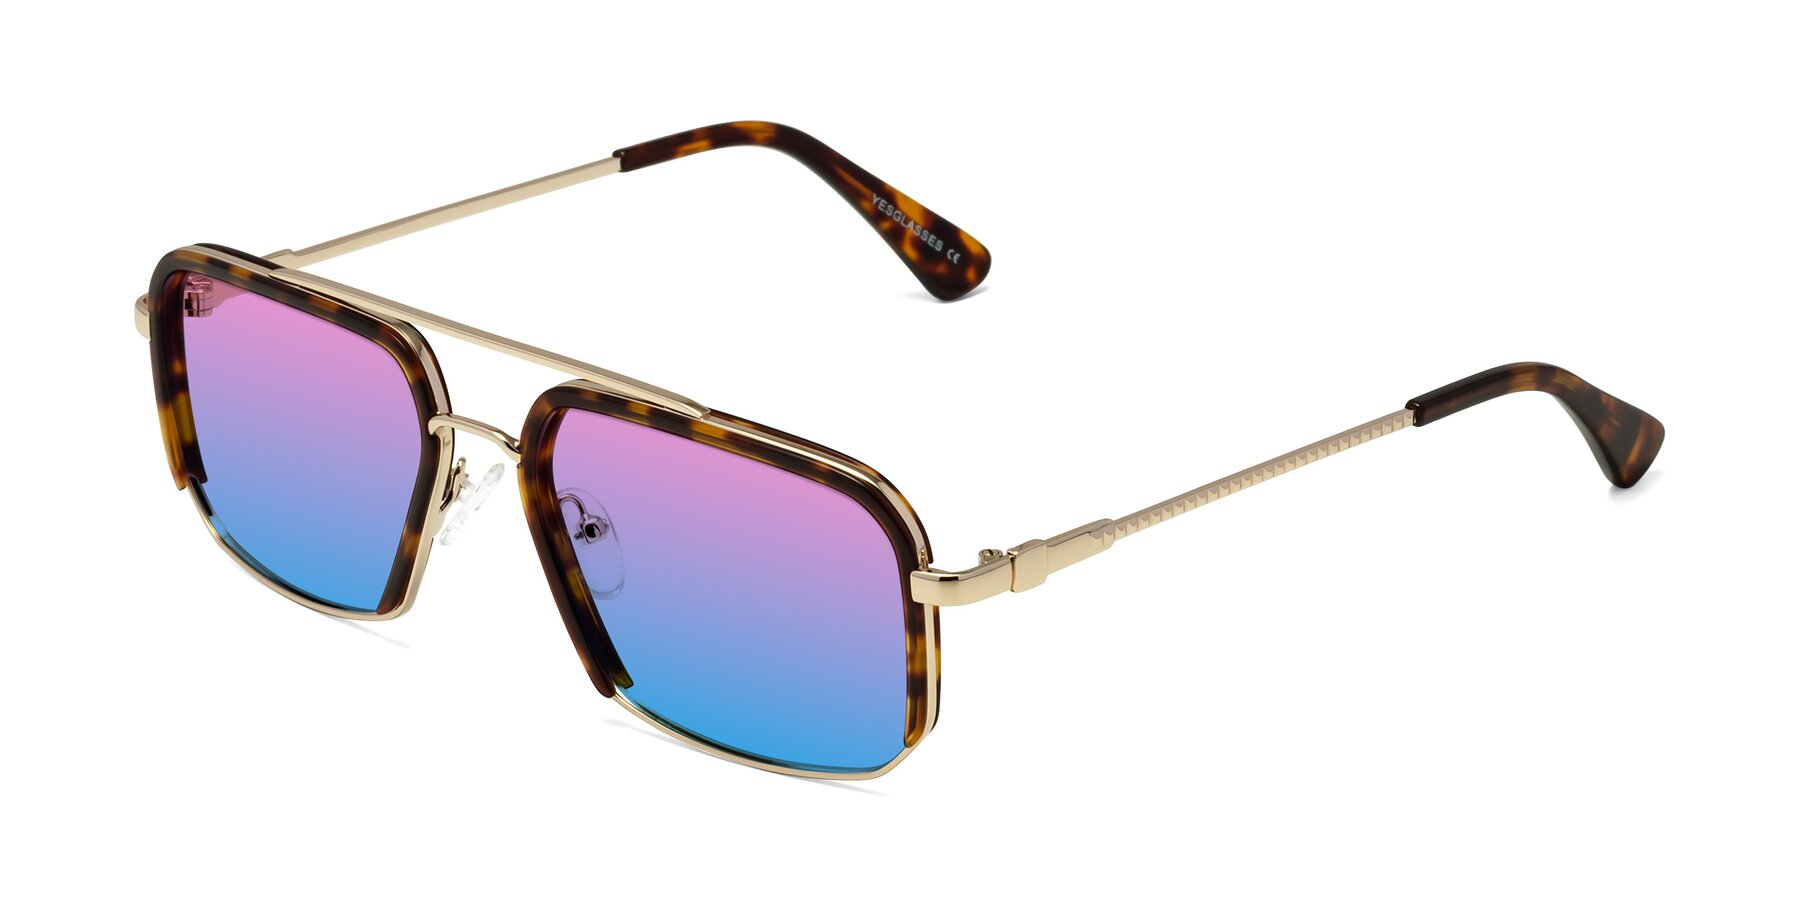 Angle of Dechter in Tortoise-Gold with Pink / Blue Gradient Lenses